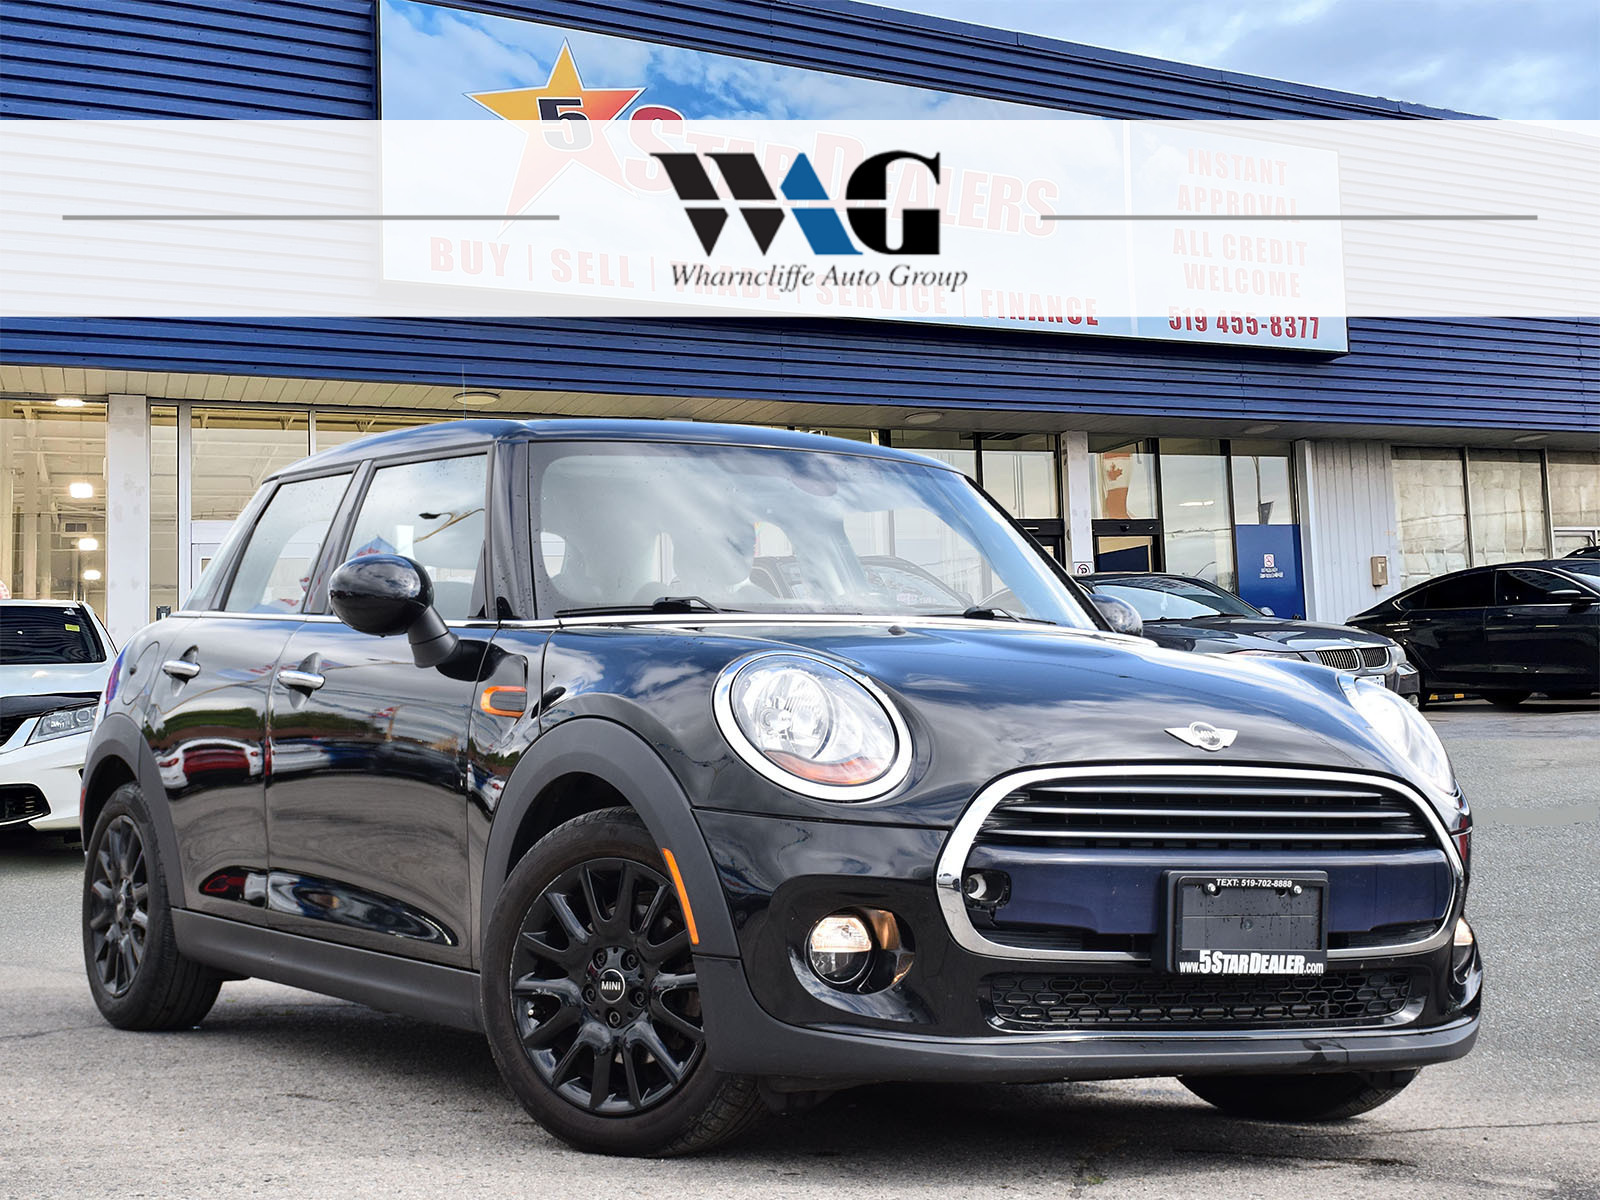 2018 MINI 5 Door LEATHER PANO ROOF H-SEATS! WE FINANCE ALL CREDIT!